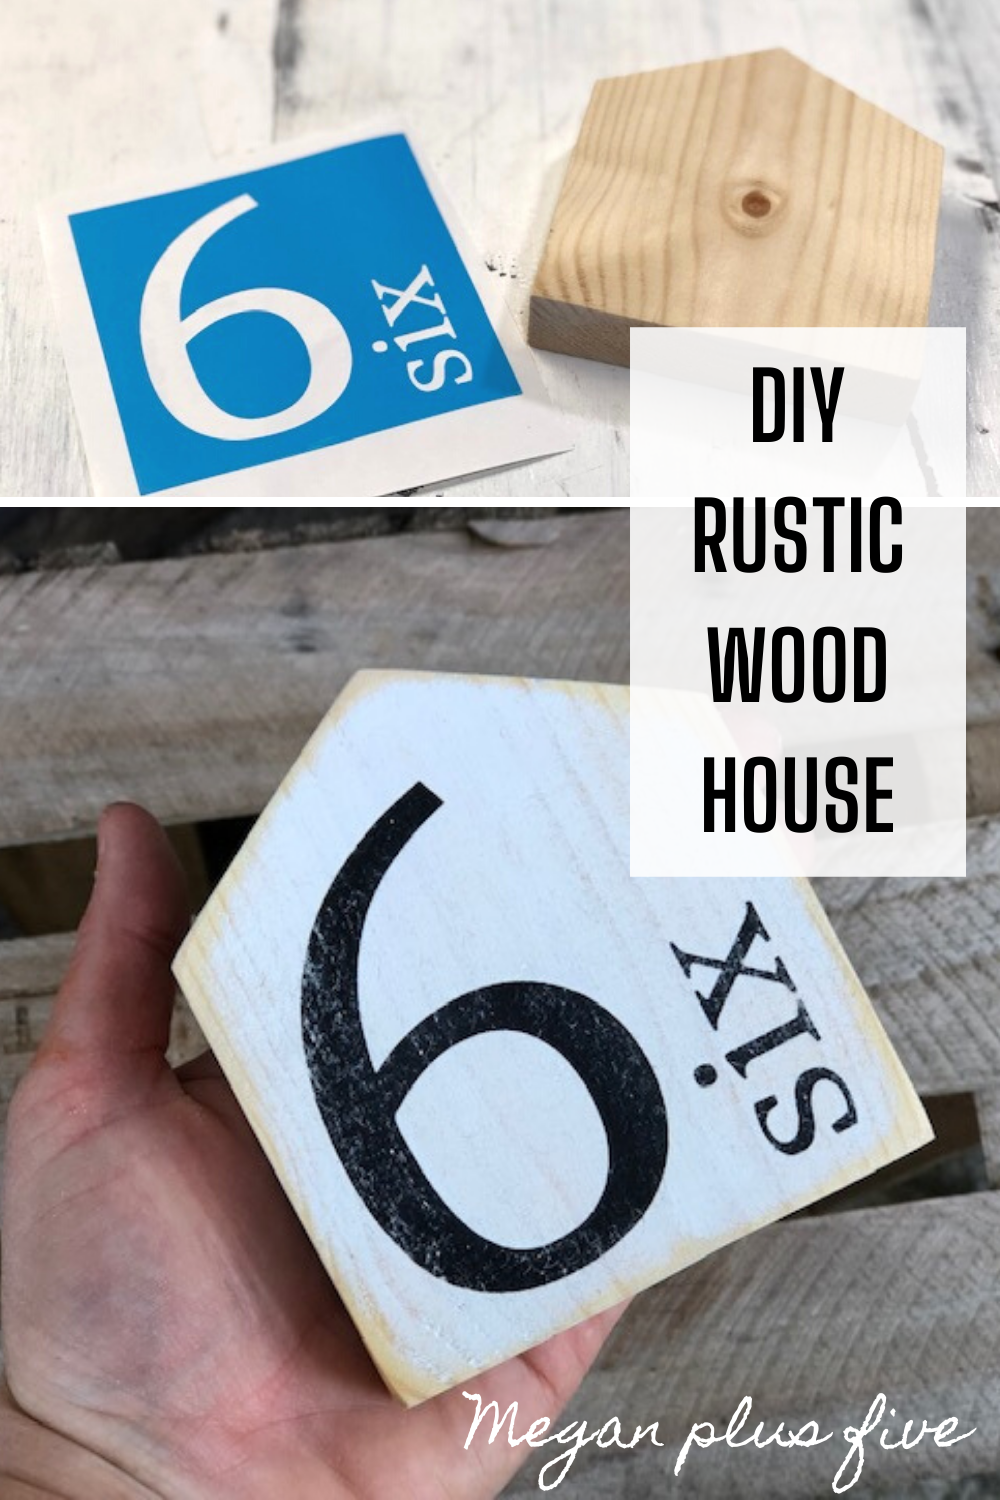 How to make mini wood houses from a 1x4. Stenciling a wood family number sign. DIY rustic farmhouse decorations to make at home, easy